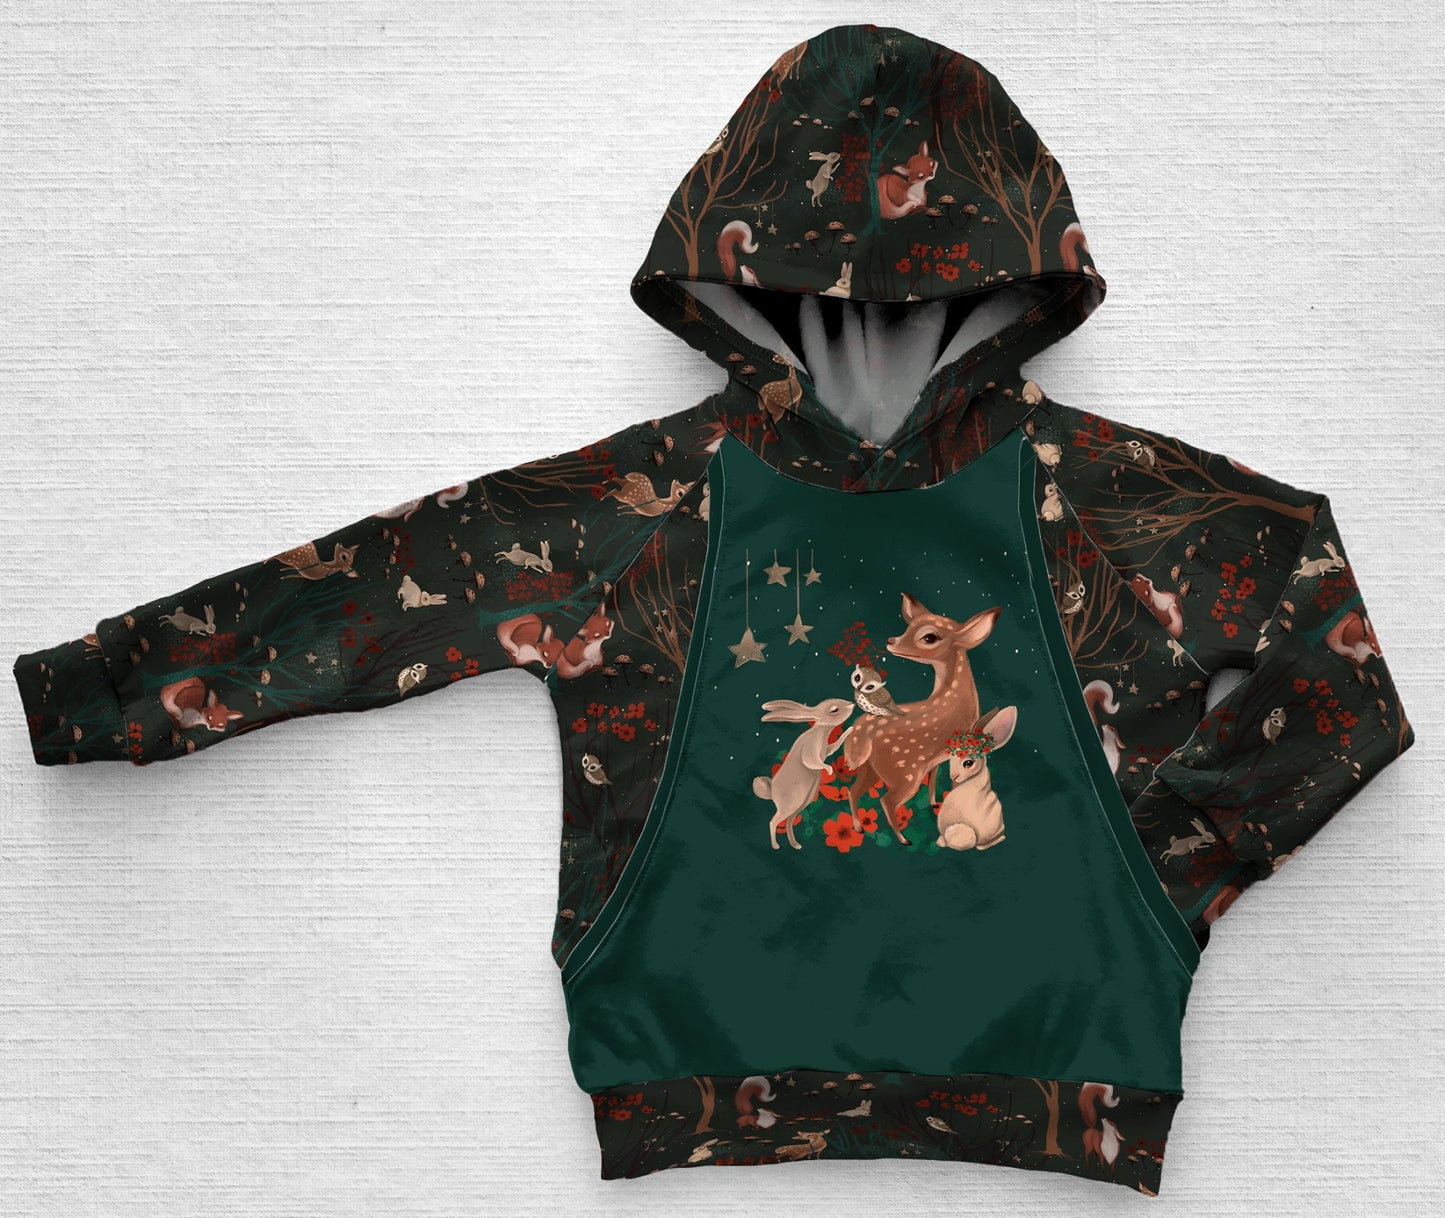 A dark green panel hoodie with forest animals at night